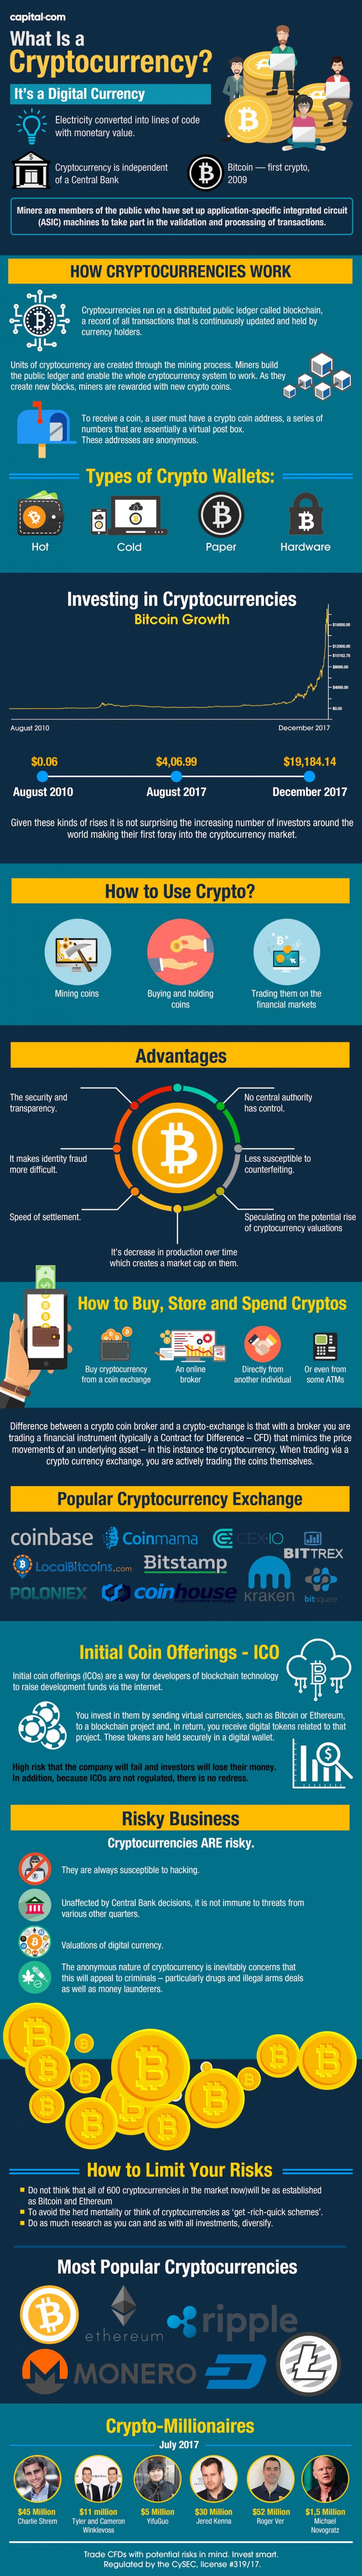 What is a Cryptocurrency?